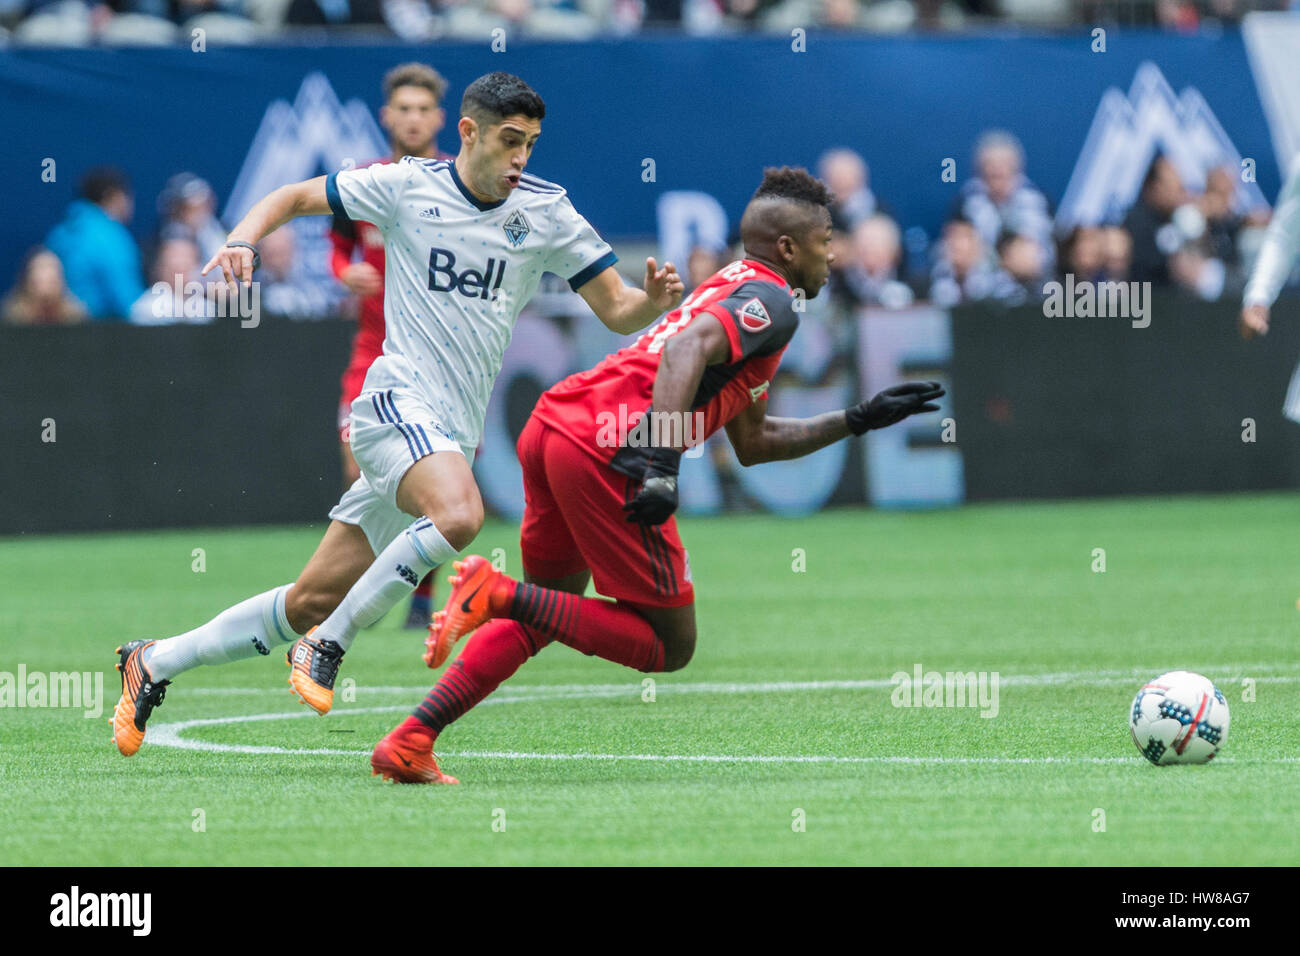 Vancouver, Canada. 18 March, 2017. Matias Laba #15 of the Vancouver Whitecaps, and Armando Cooper #31 of Toronto FC. going for the ball. Vancouver Whitecaps vs Toronto FC, BC Place Stadium. Toronto defeats Vancouver 2-0, with goals from Victor Vasquez #7 and Jozy Altidore #17 of Toronto FC  © Gerry Rousseau/Alamy Live News Stock Photo